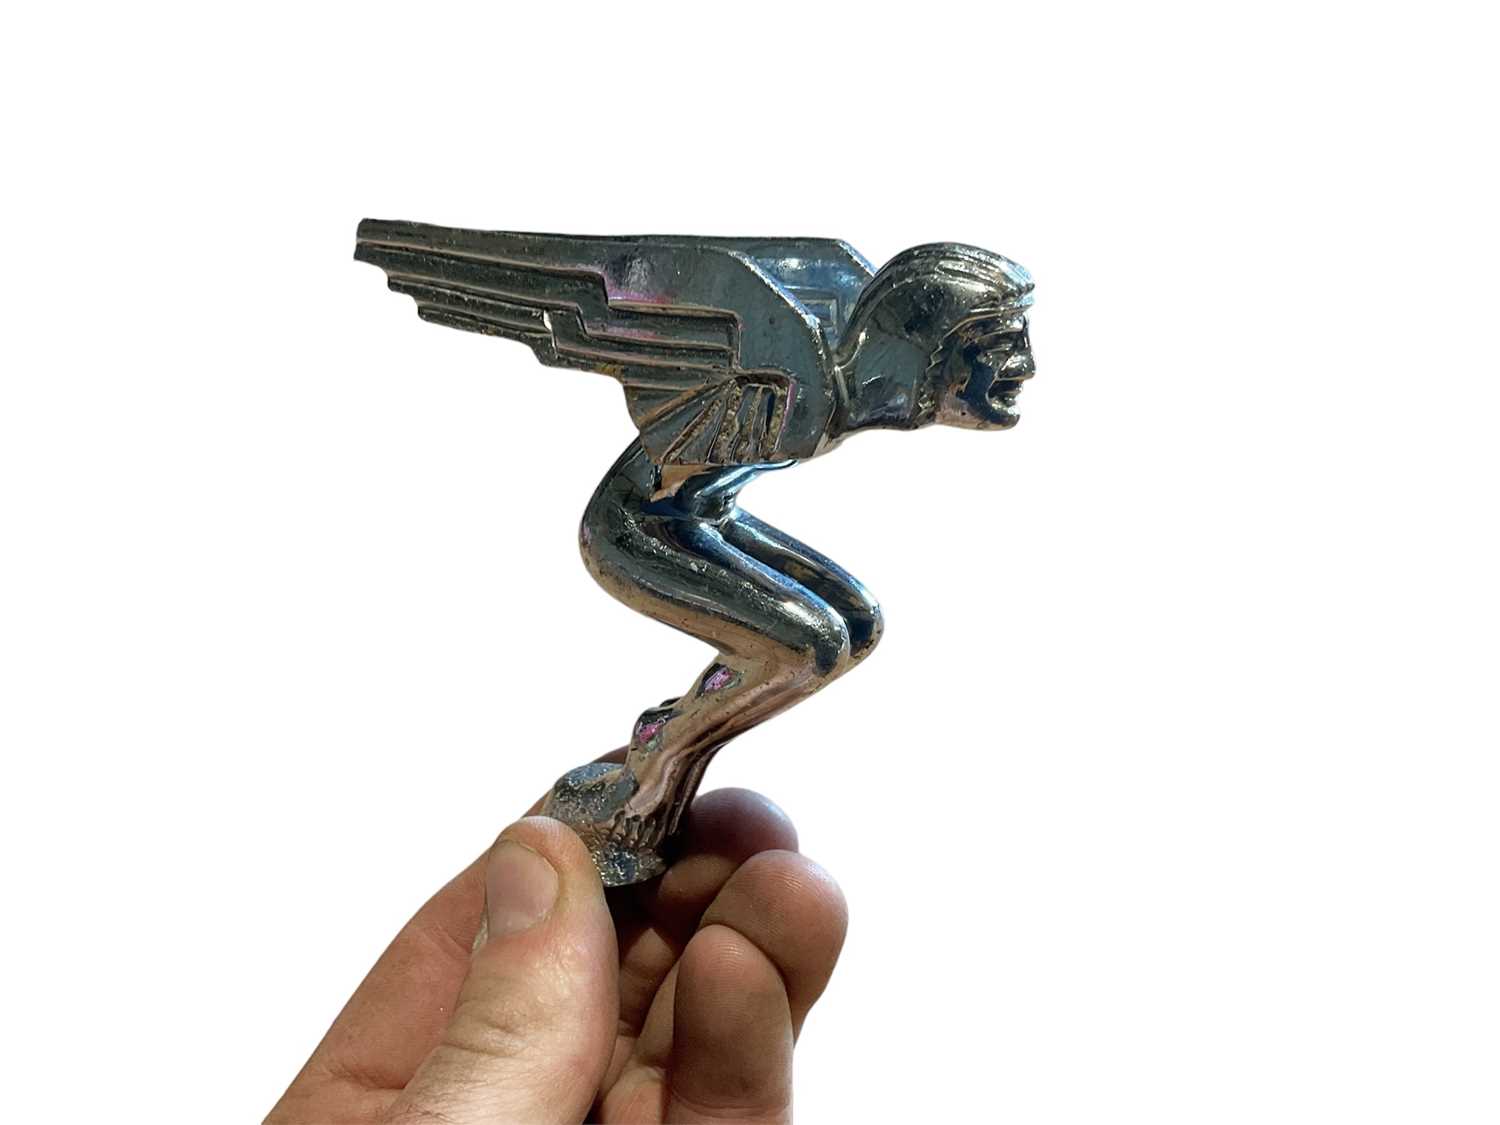 Lot 110 - 1930s chromium plated Egyptian Goddess car mascot, believed to have originally been retailed by Desmo, 10.5cm in overall height.